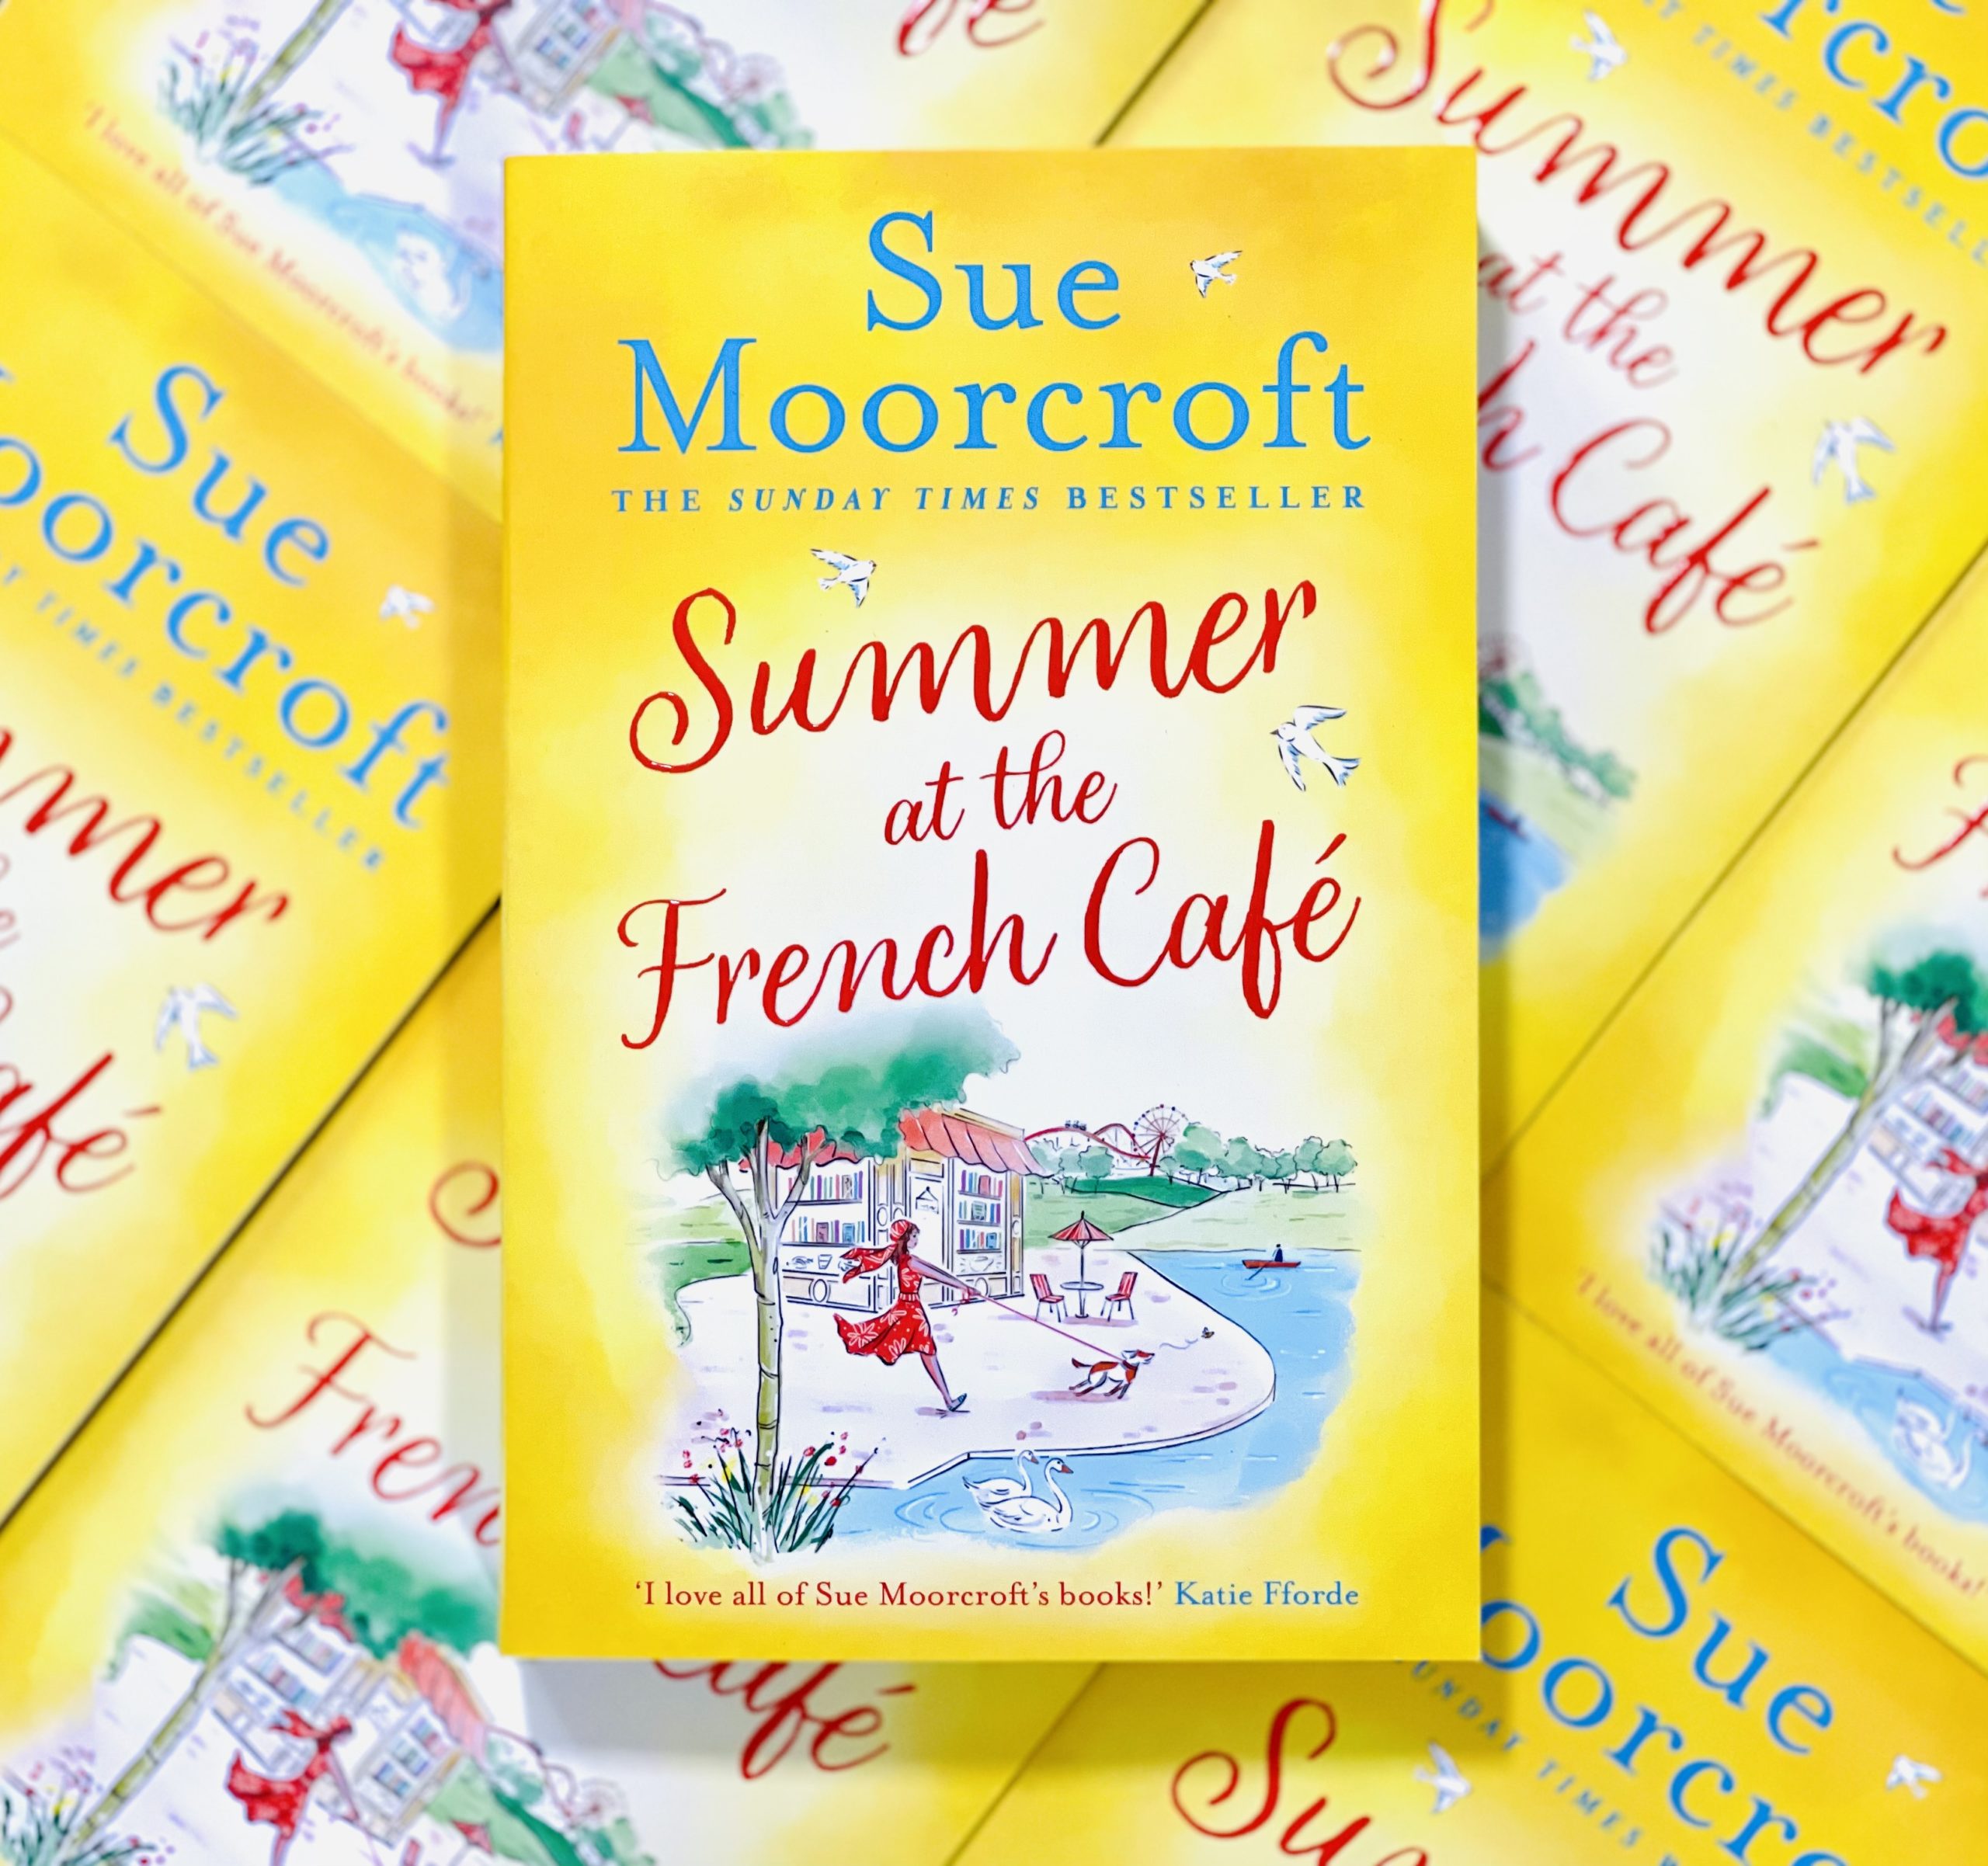 Summer at the French Cafe by Sue Moorcroft Tesselate